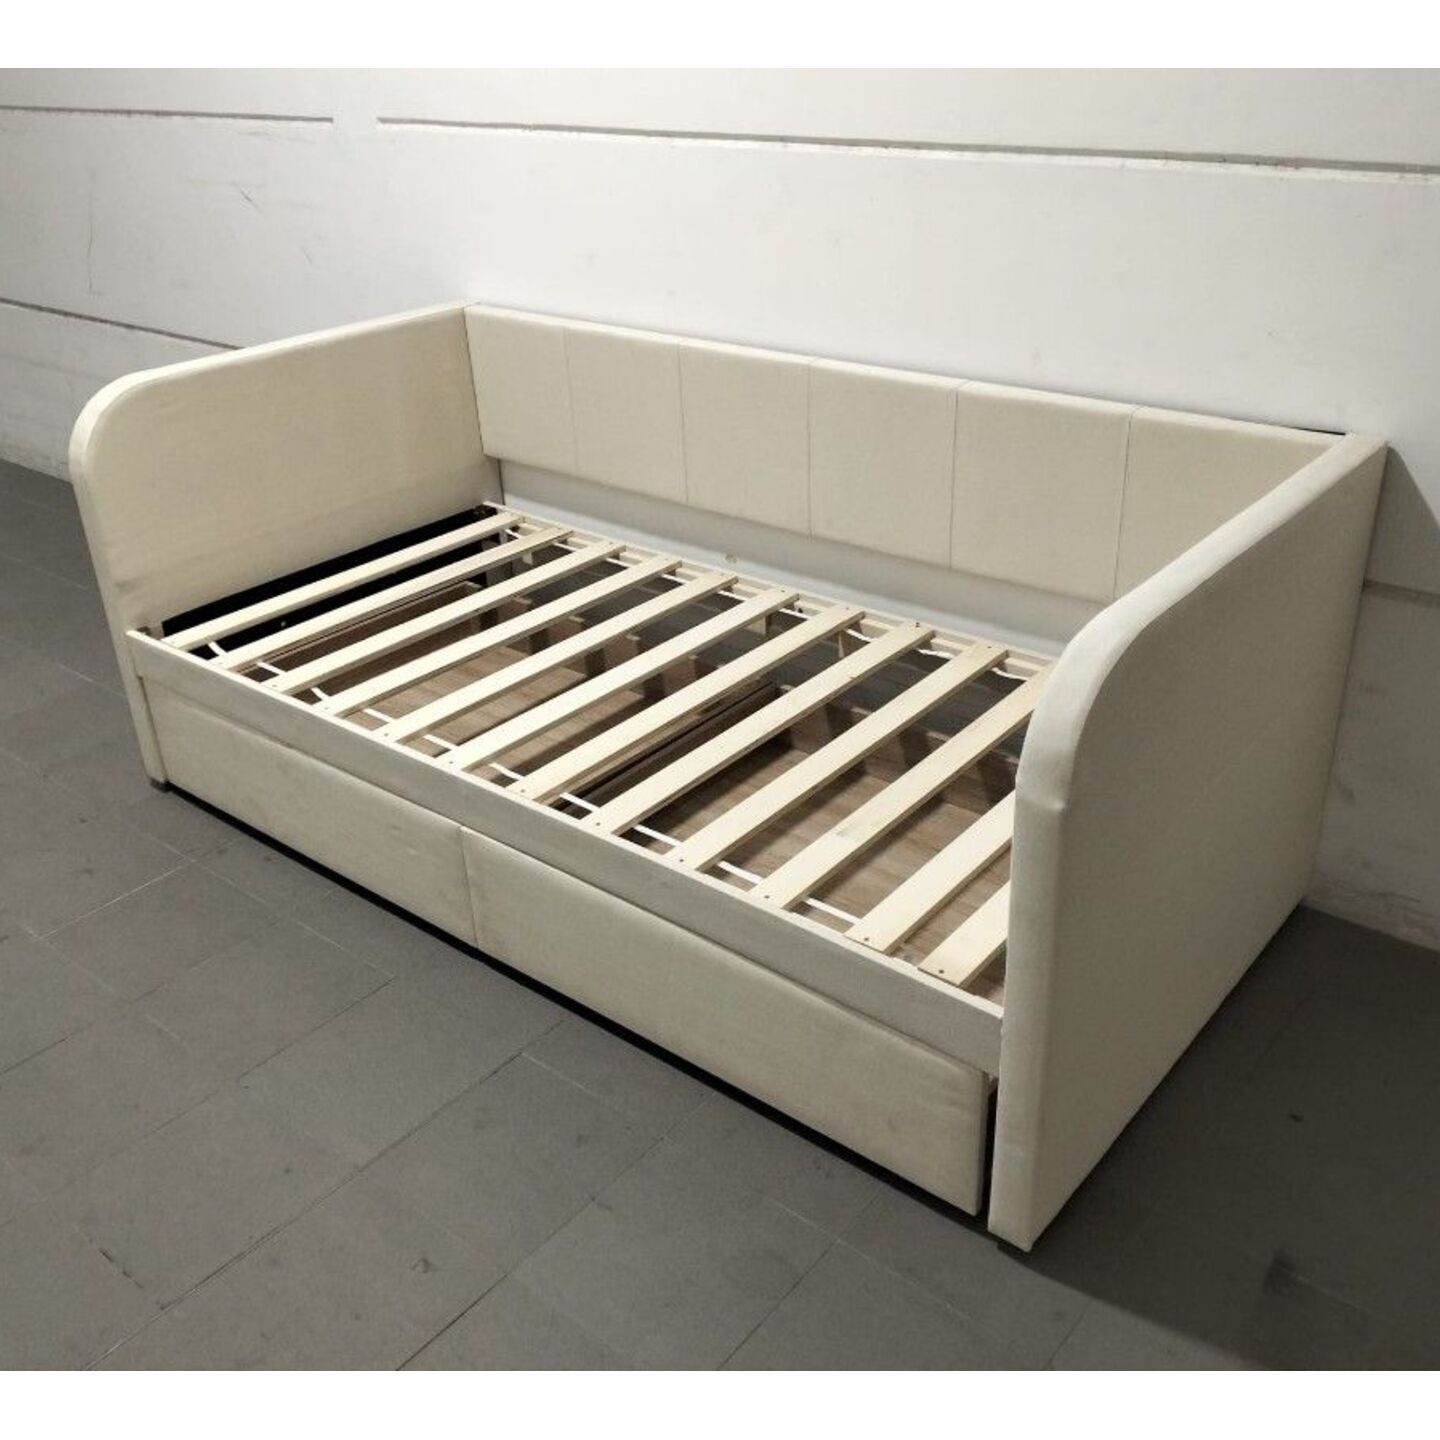 LAFAYA Single Day Bed with Pull Out Trundle in CREAM FABRIC